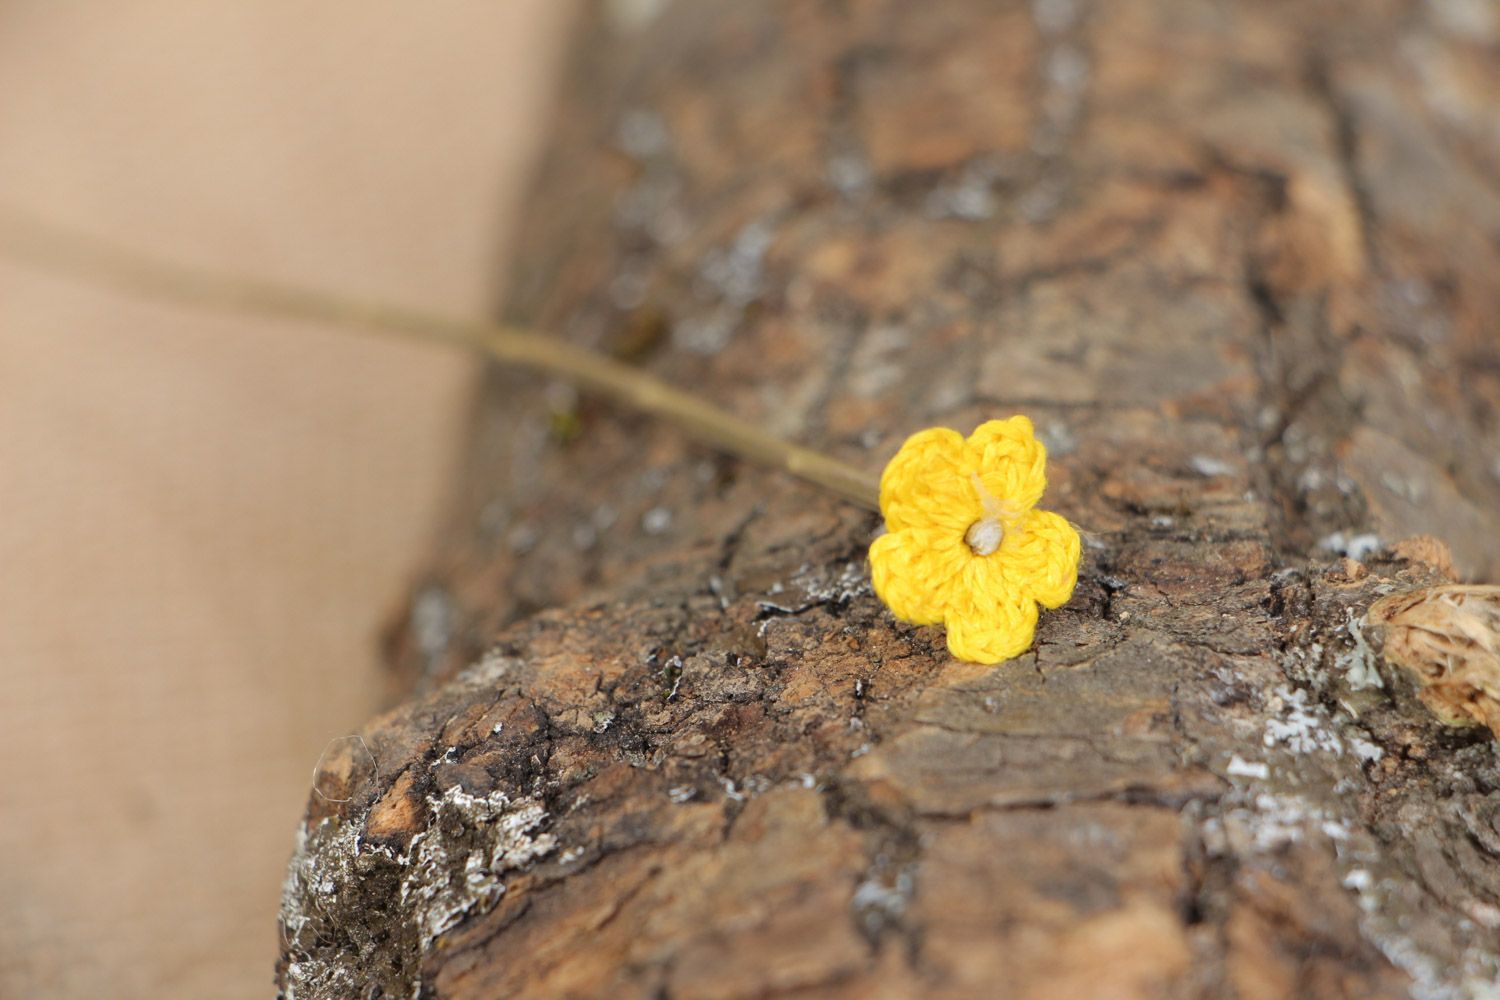 Handmade tender small artificial yellow flower crocheted of cotton threads photo 1